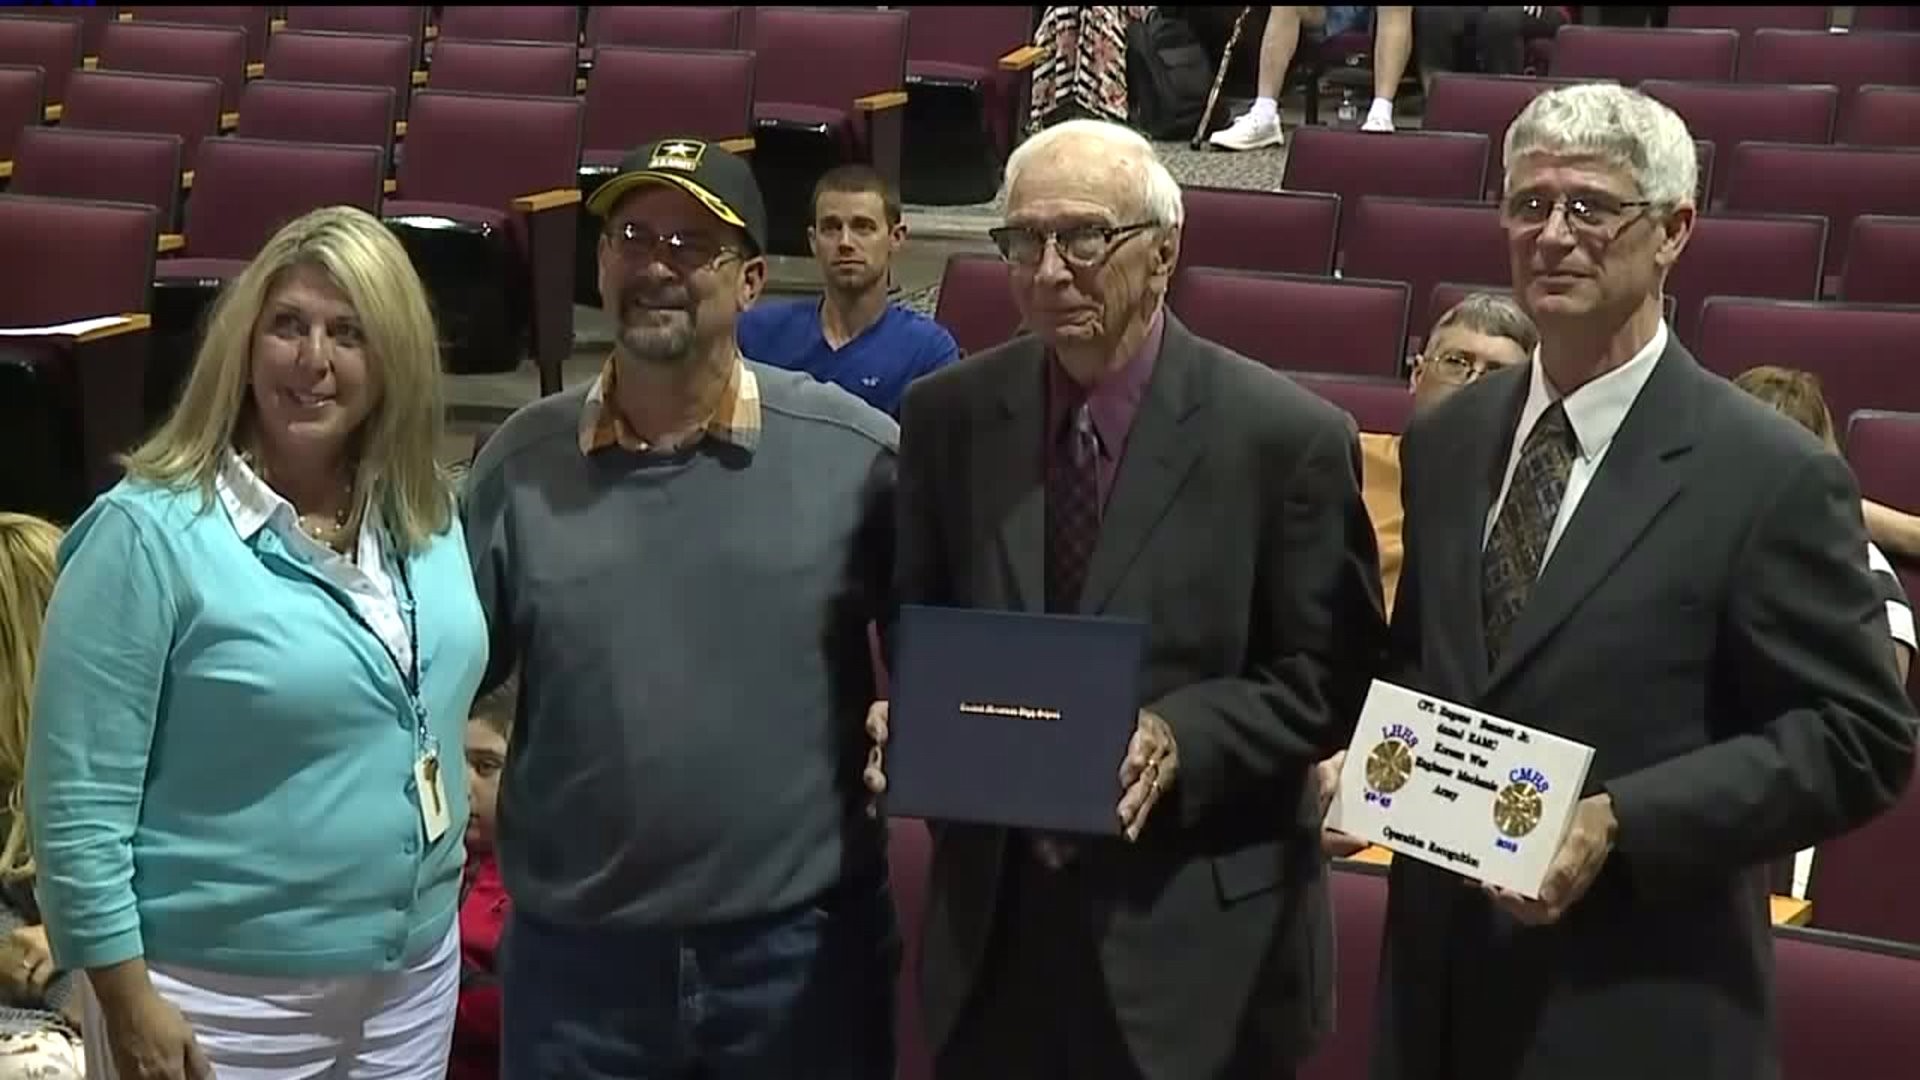 Veteran Receives High School Diploma More Than 70 Years After Leaving School